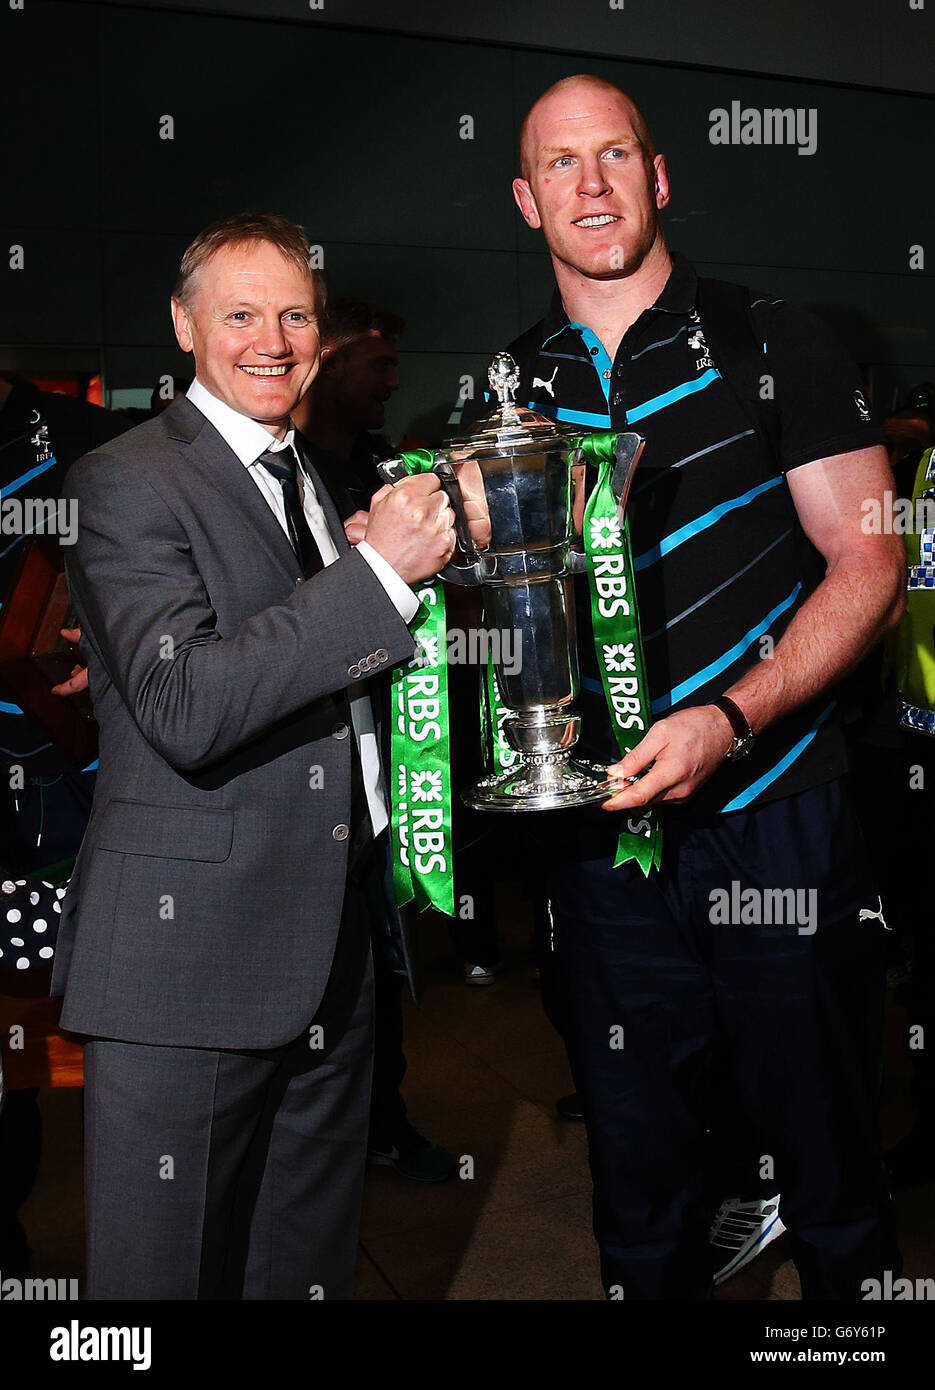 Ireland captain Paul O'Connell (right) and head coach Joe Schmidt with the 6 nations trophy as the Ireland team arrive at Dublin Airport, Ireland. Stock Photo